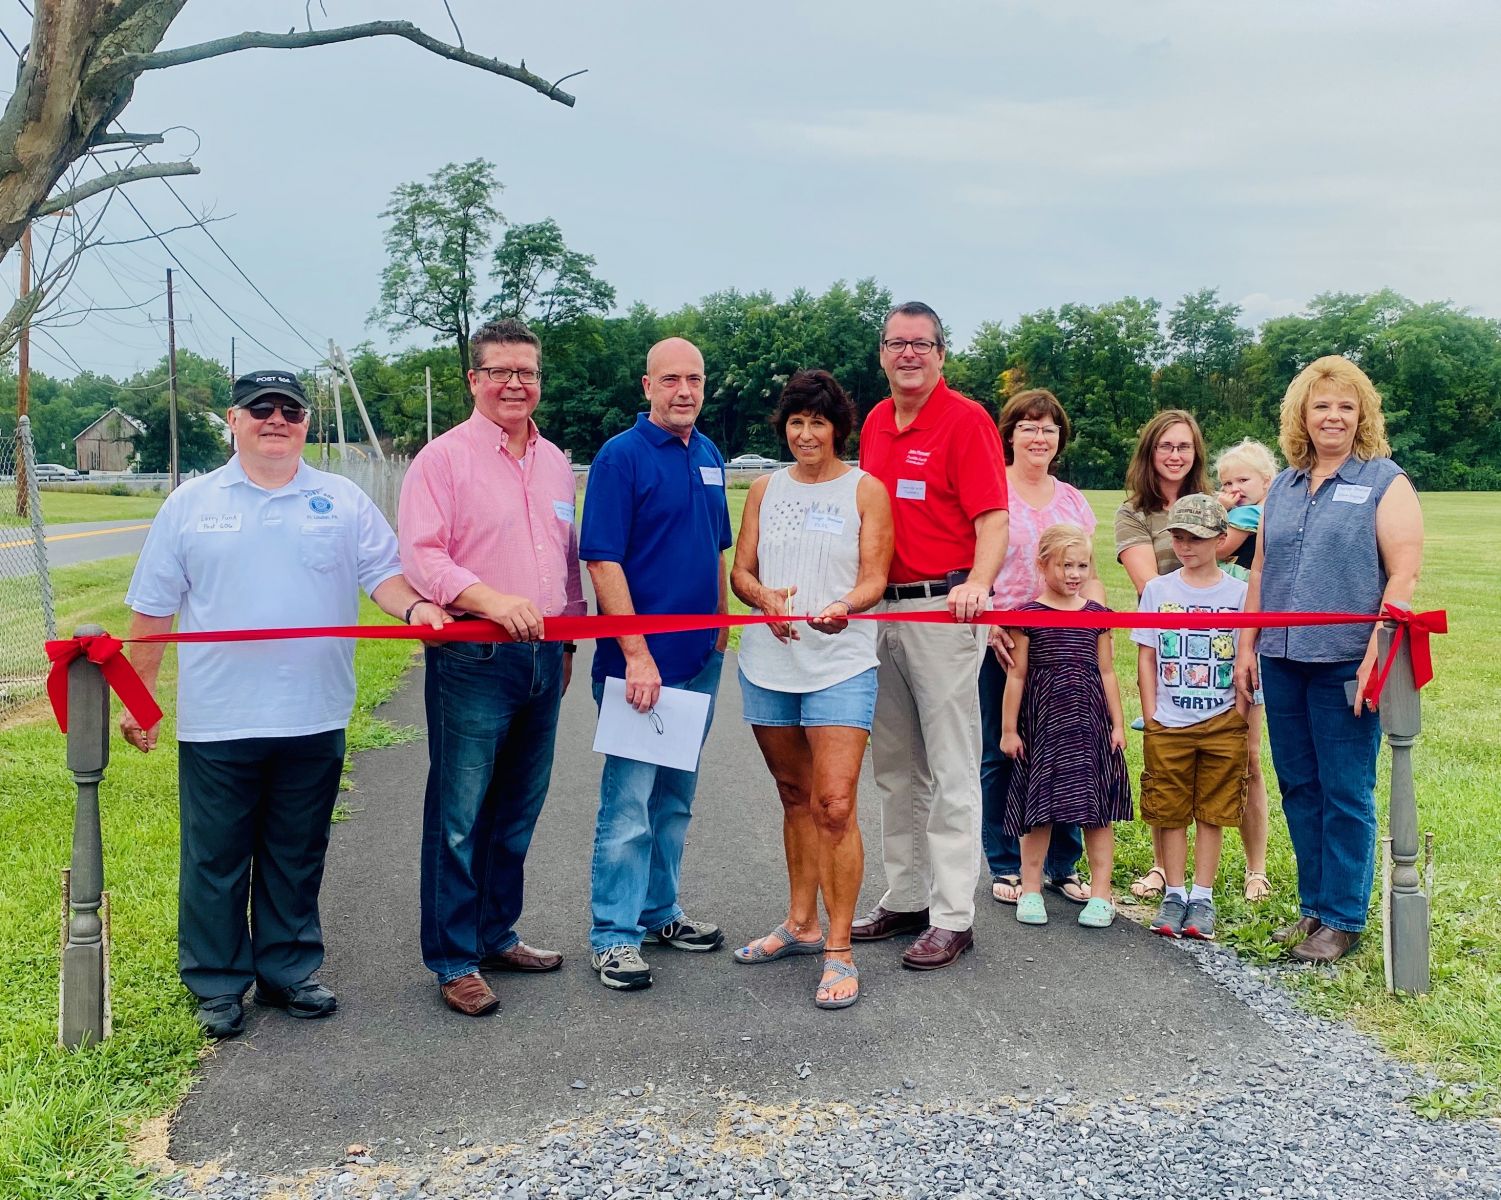 Photo credit: Tuscarora Area Chamber of Commerce Walking Trail Ribbon Cutting on August 17, 2020